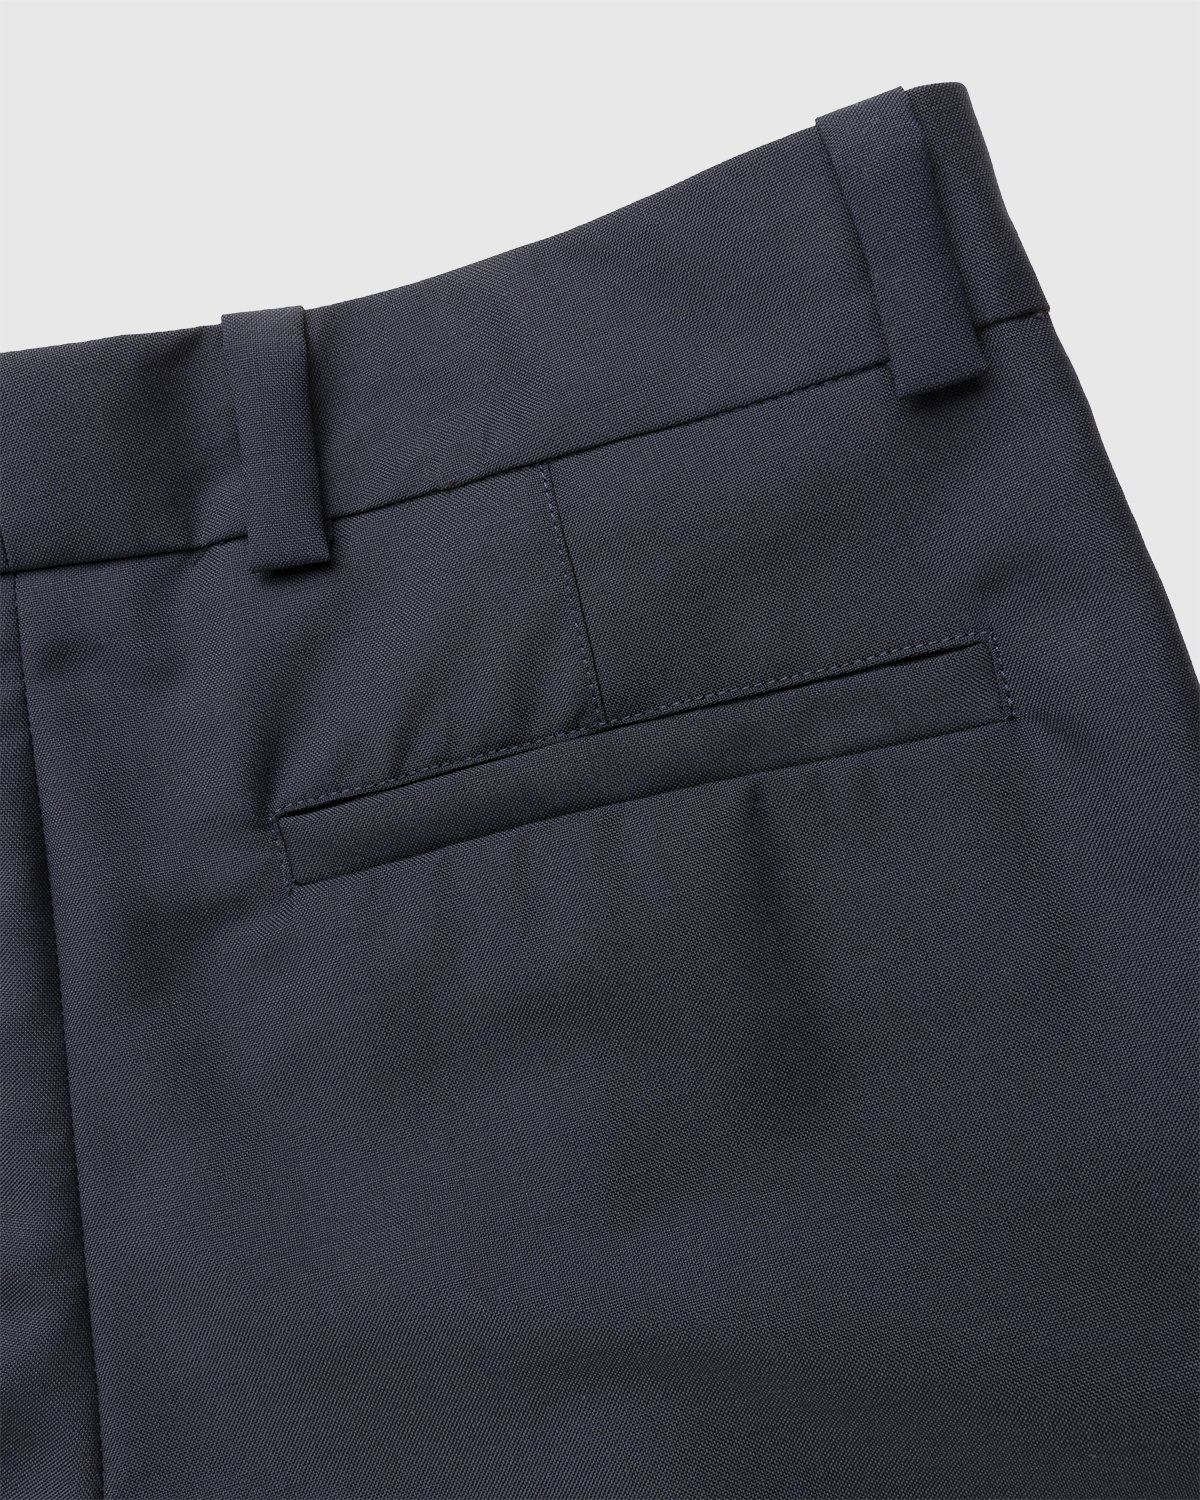 Acne Studios - Mohair Pleated Trousers Navy - Clothing - Blue - Image 3